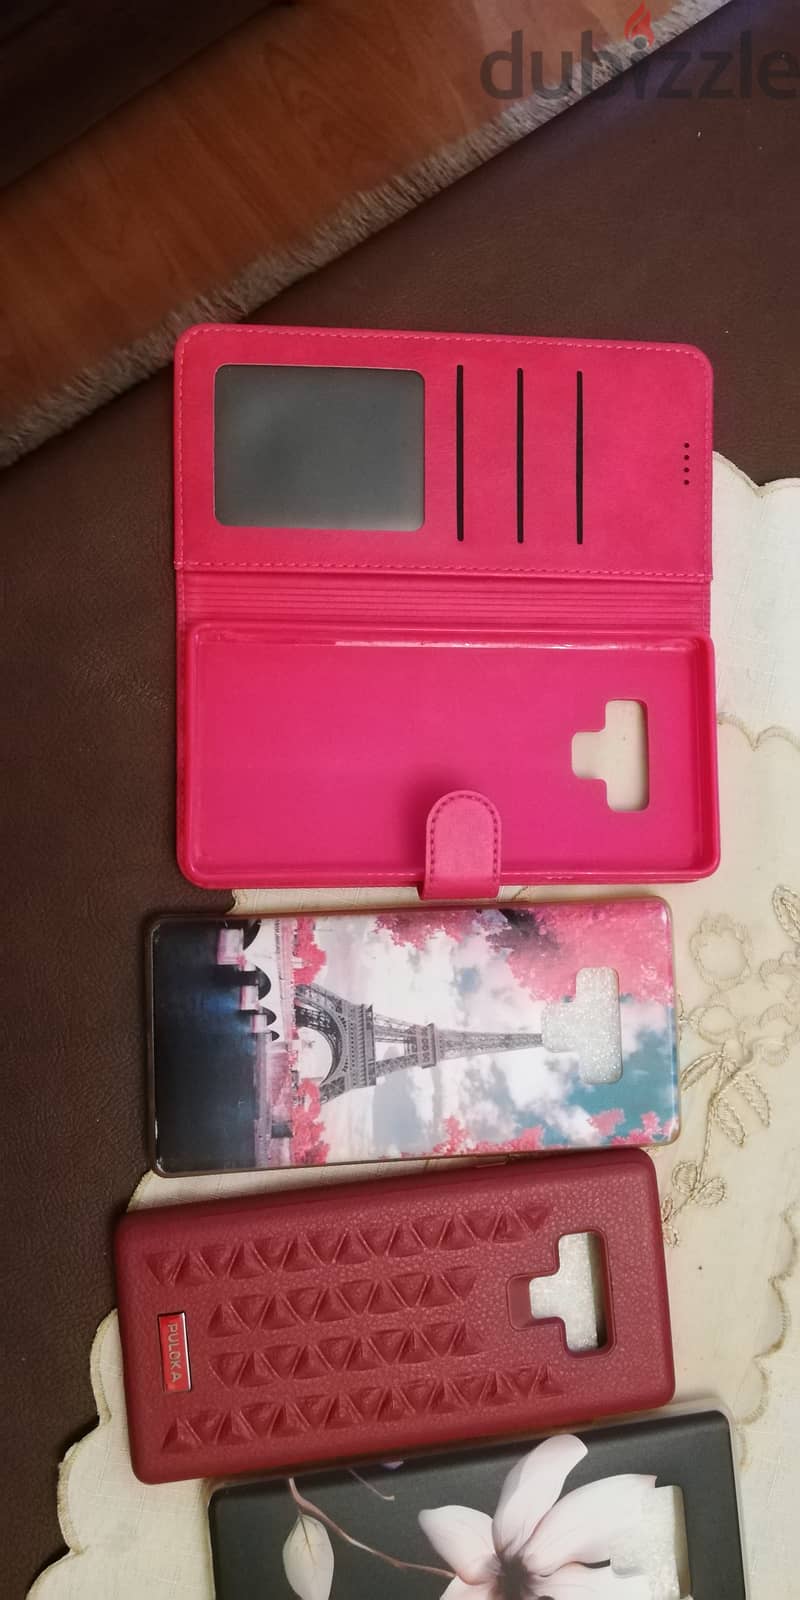 original phone covers note 9 price reduced 7